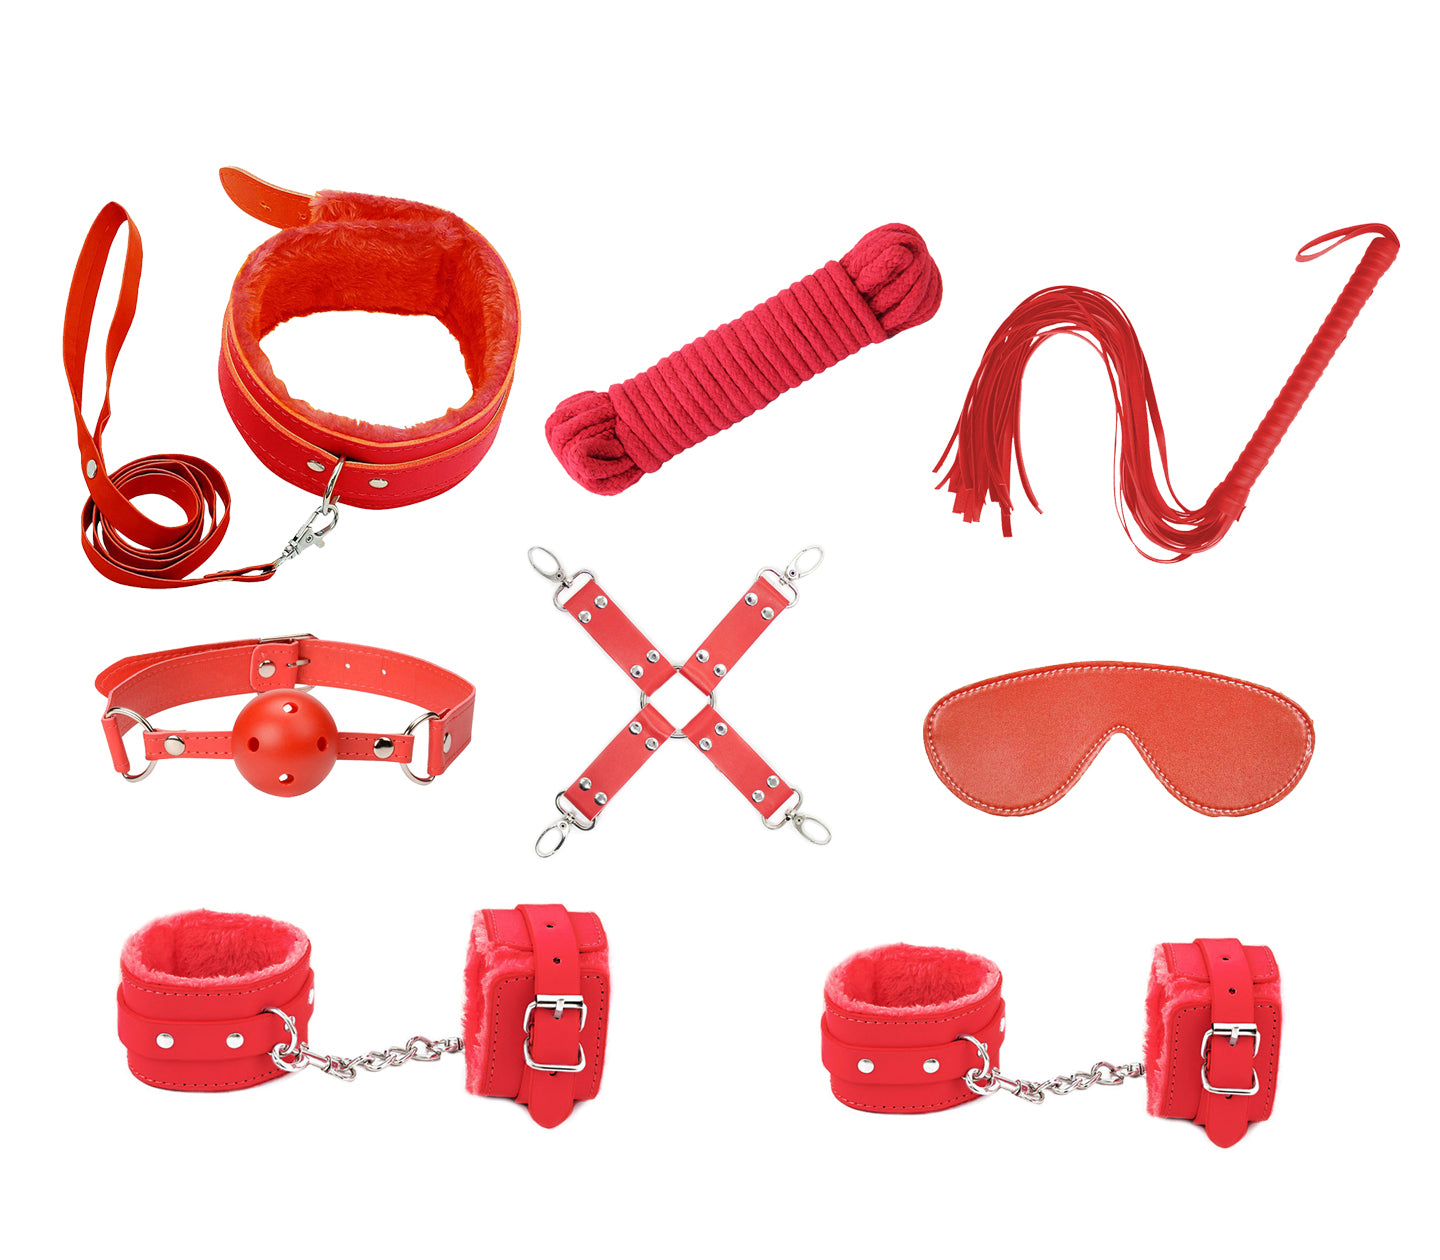 LOVE IN LEATHER 9 PIECE BONDAGE KIT RED